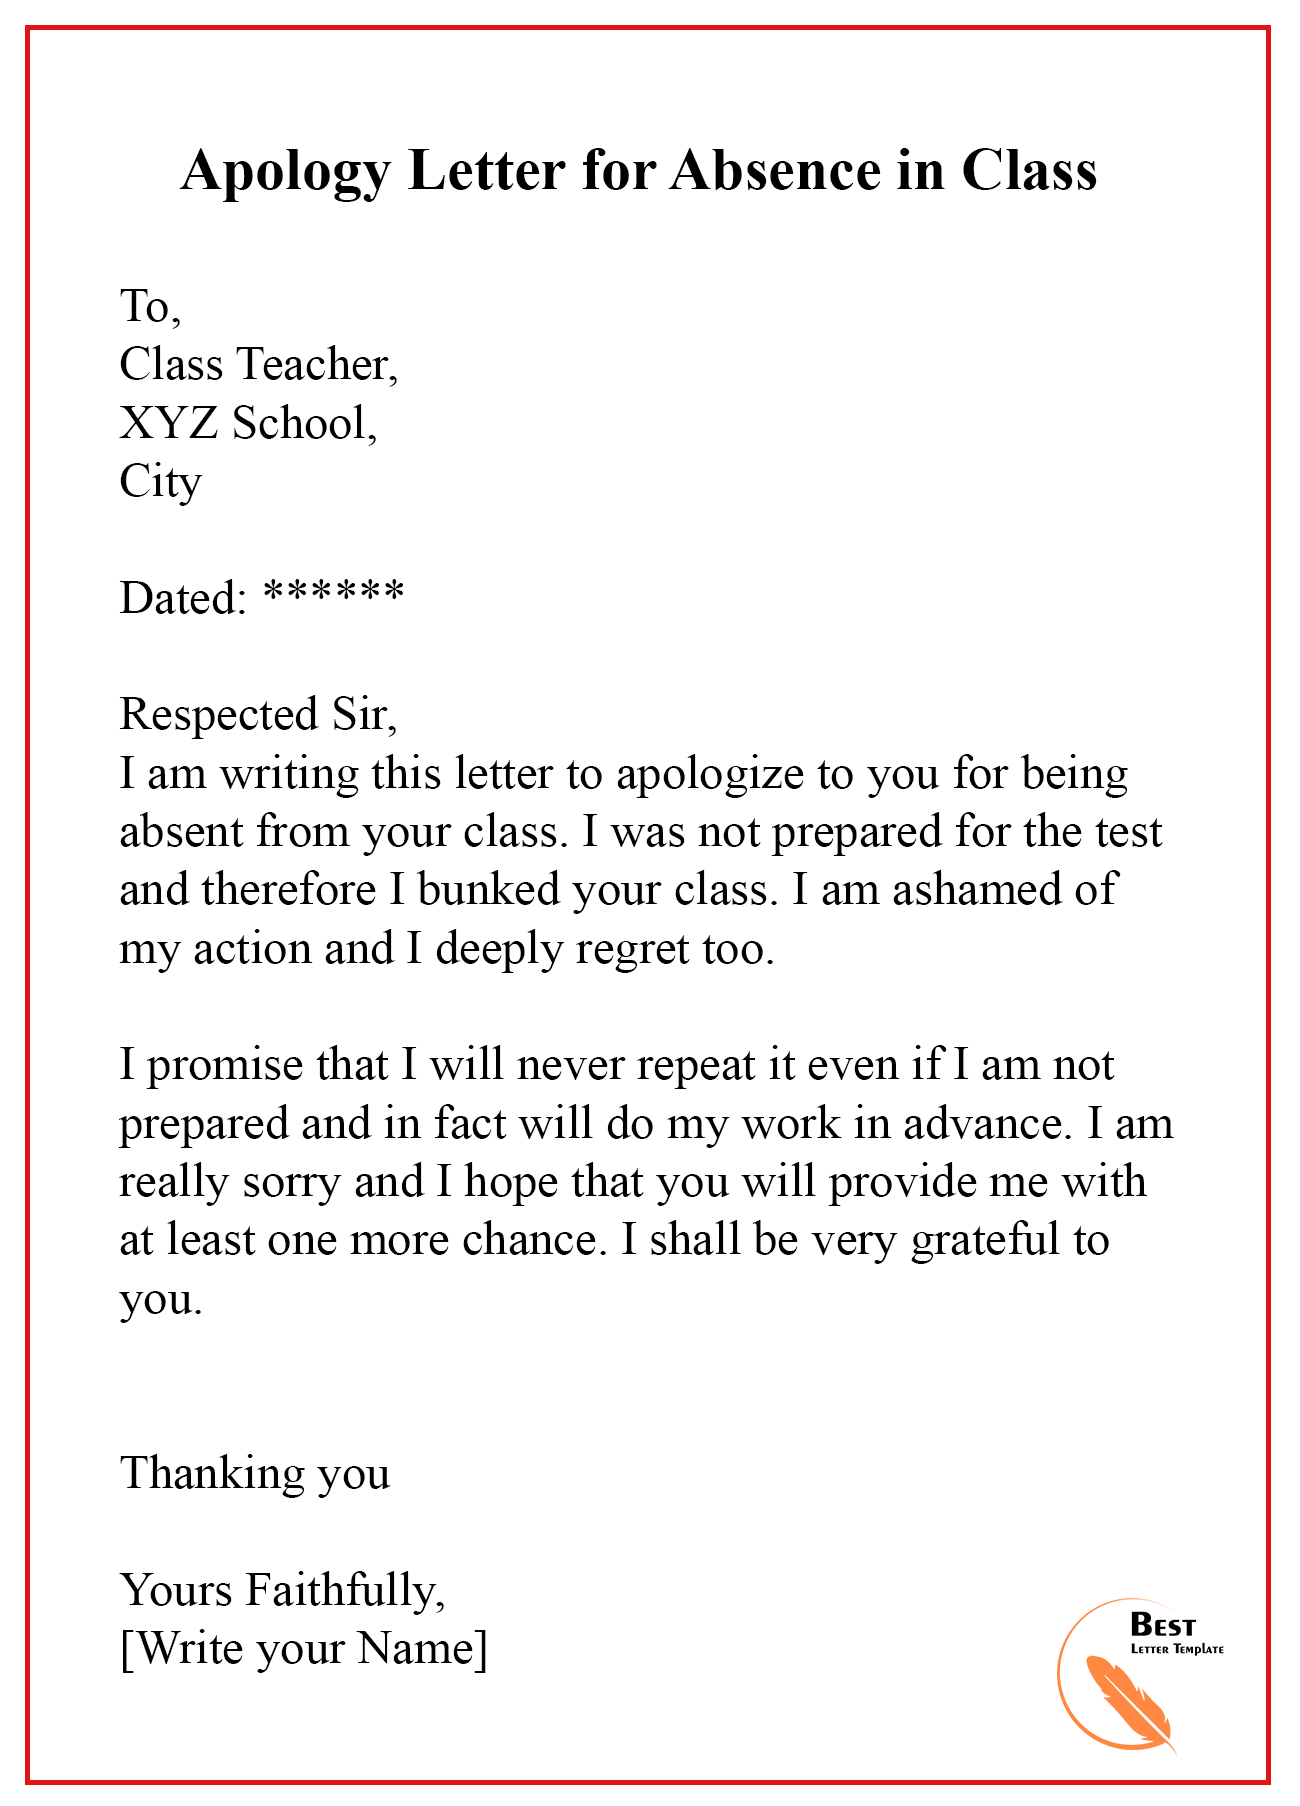 apology-letter-for-absence-in-class-best-letter-template